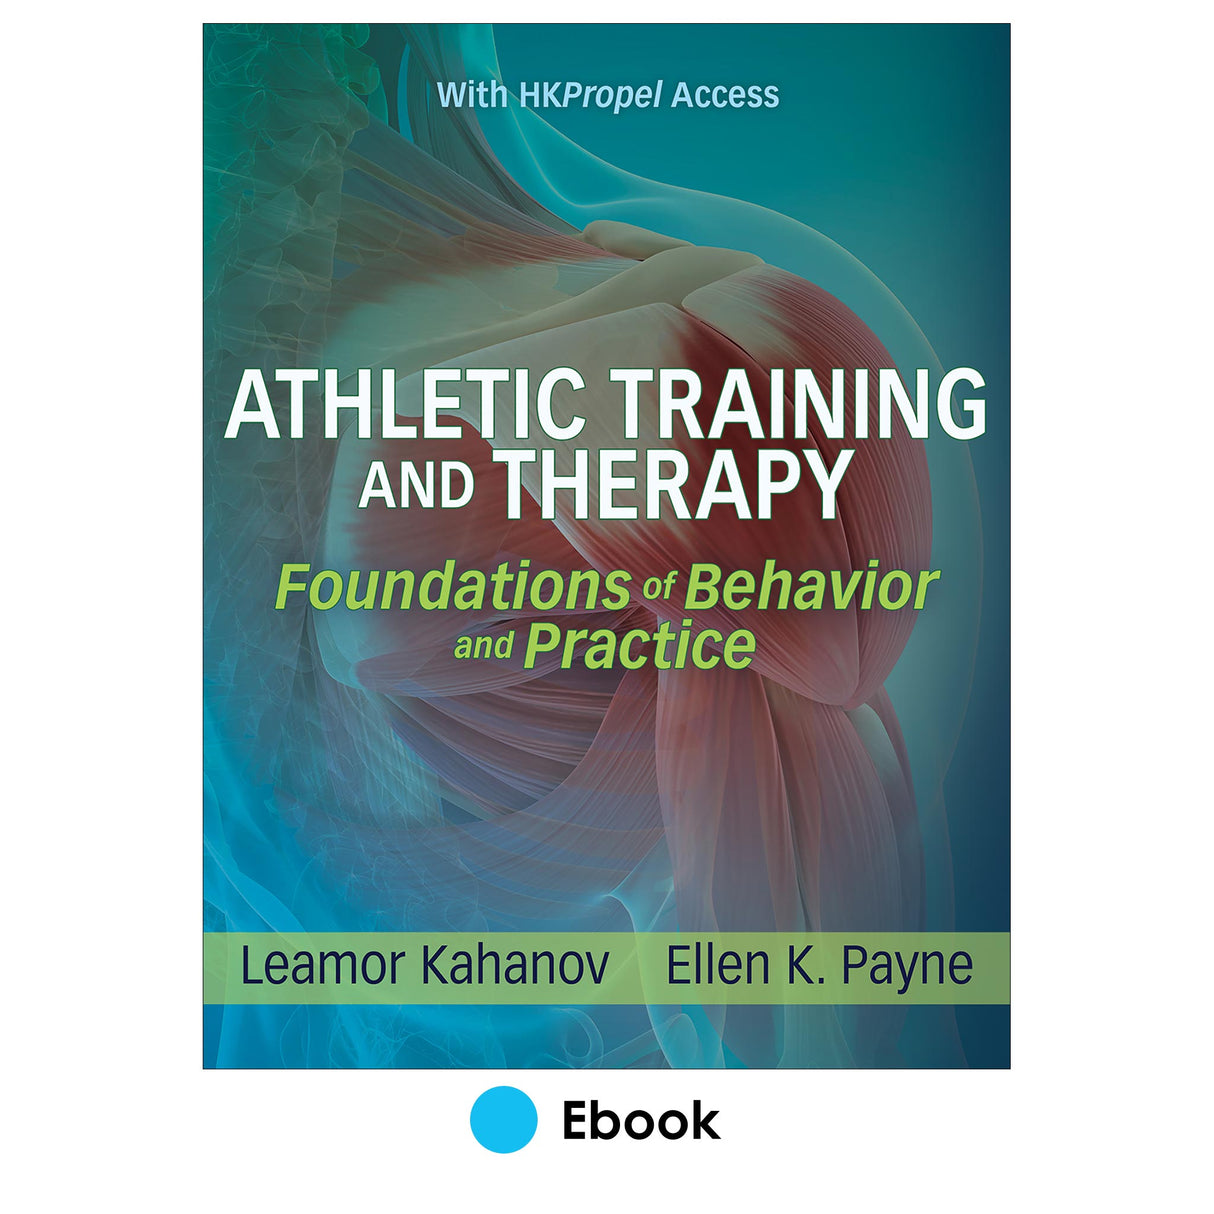 Athletic Training and Therapy Ebook With HKPropel Access